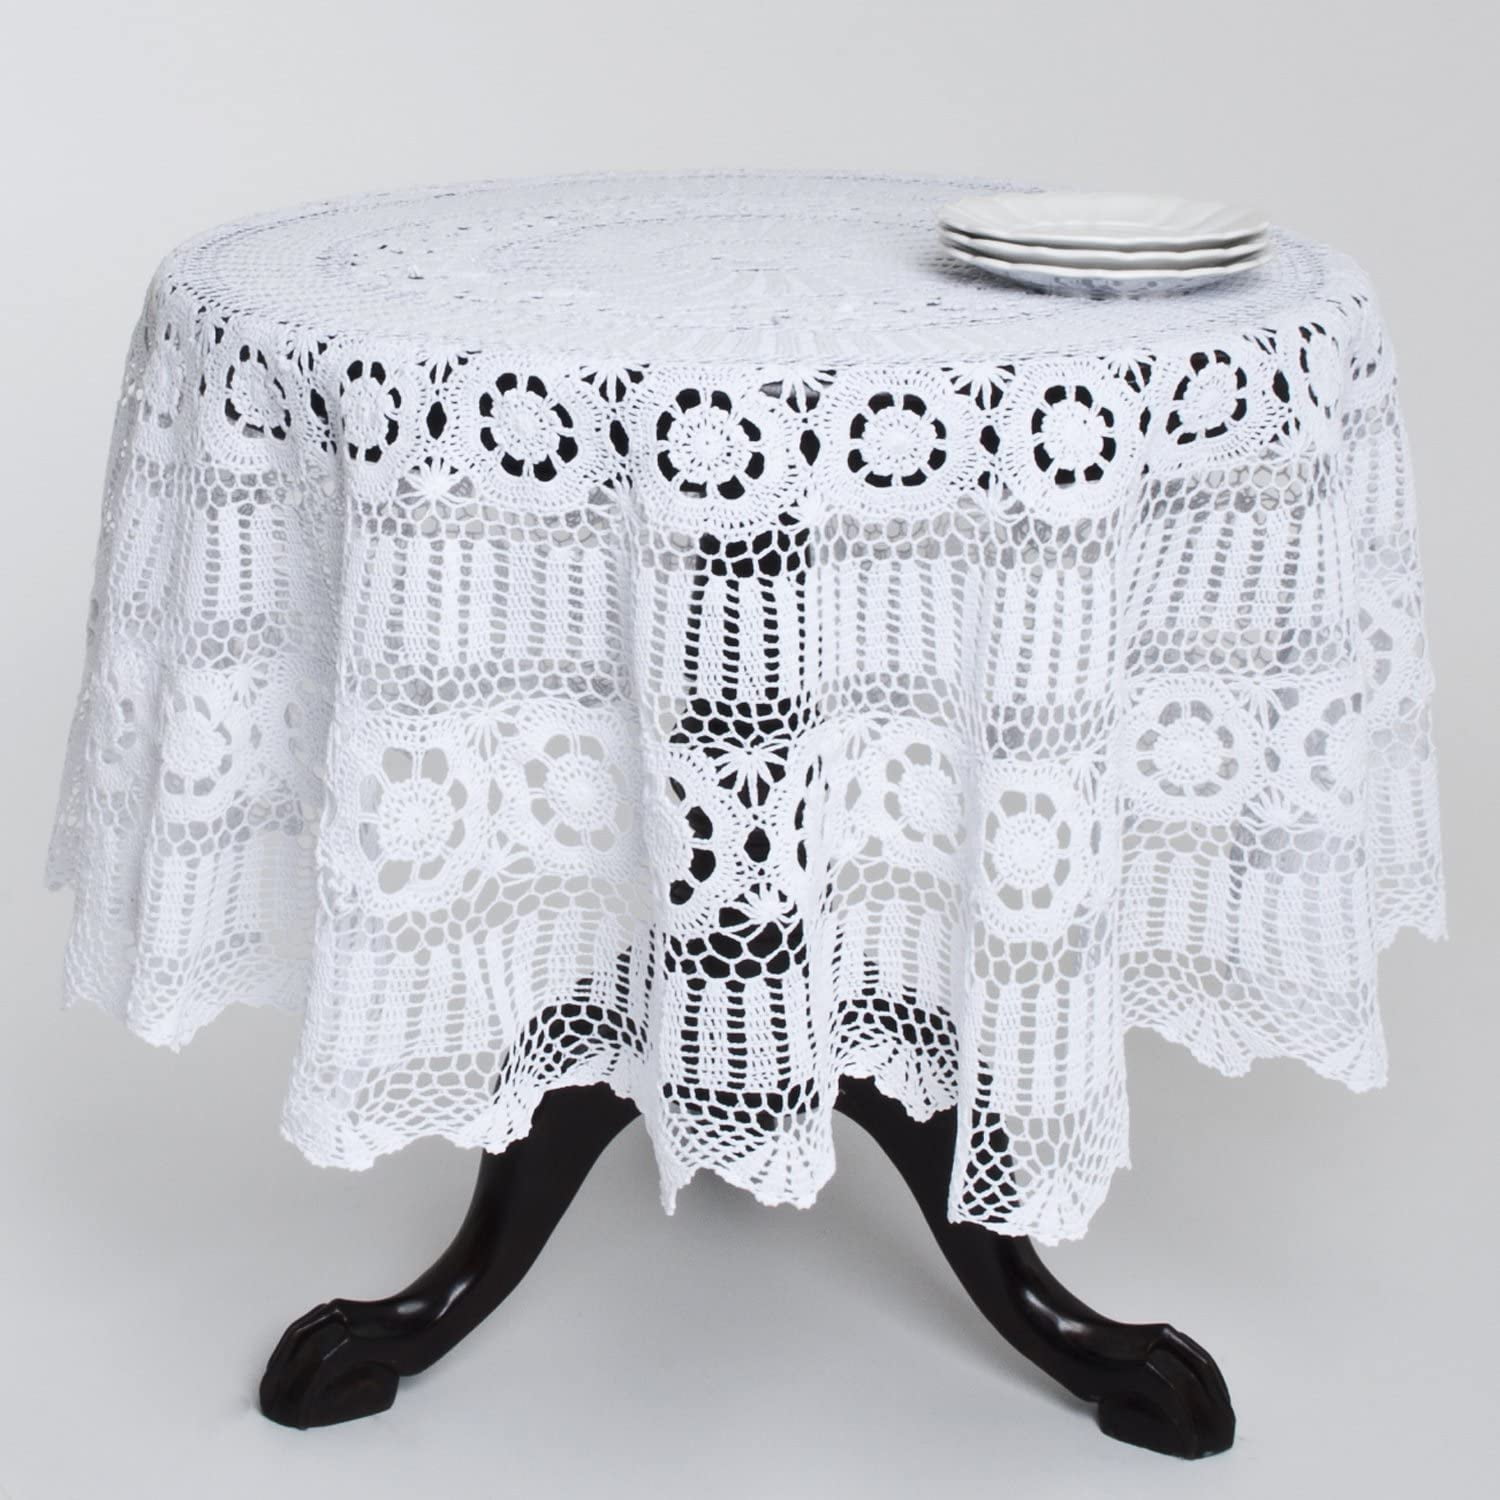 Download Fennco Styles Handmade Crochet Lace Cotton Tablecloth (30 ...